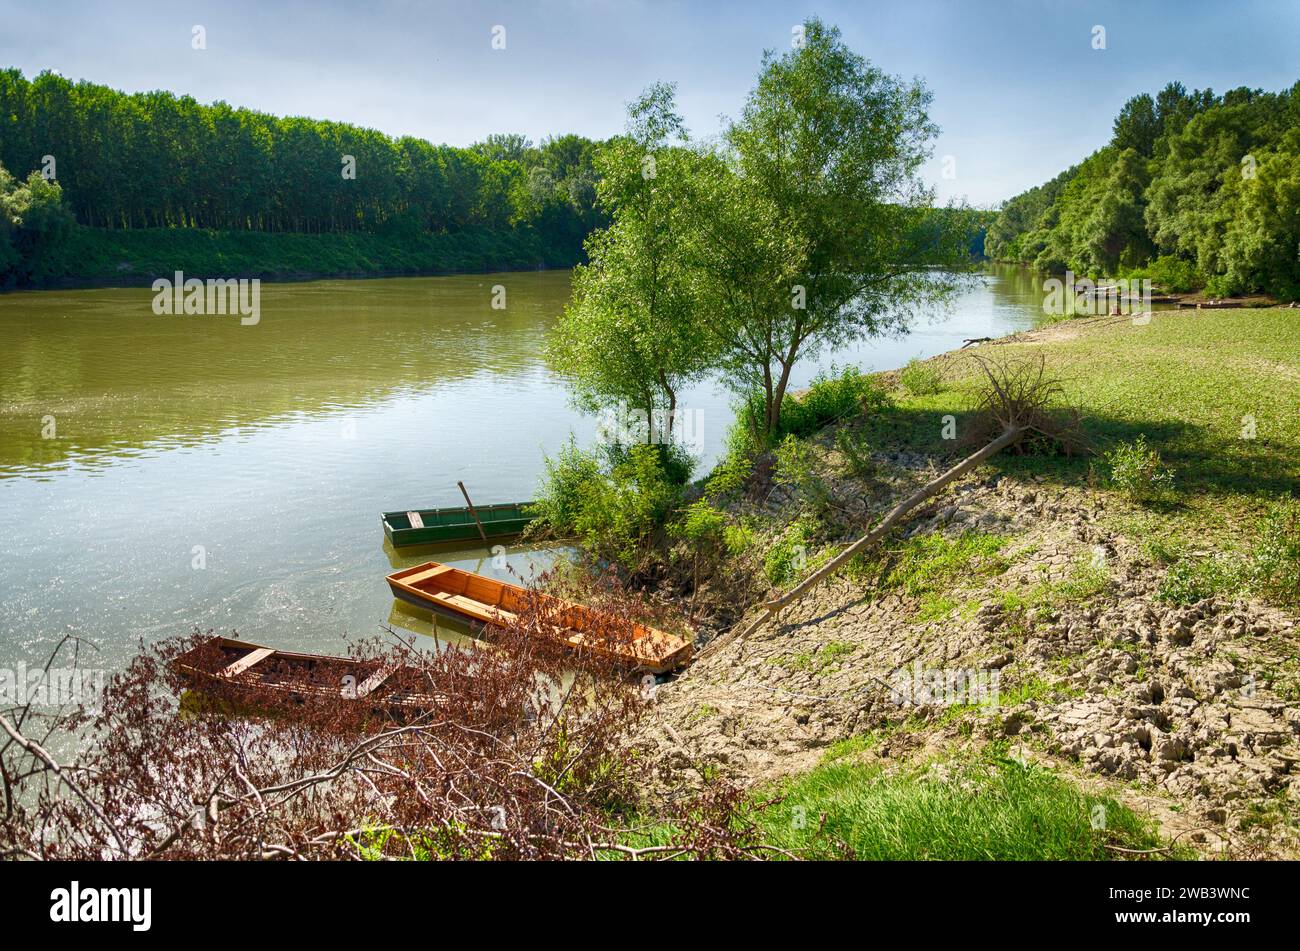 Hungary, Tiszadada in summer: wooden boats rest along the River Tisza's shore, embraced by trees, a picturesque scene in the summertime Stock Photo